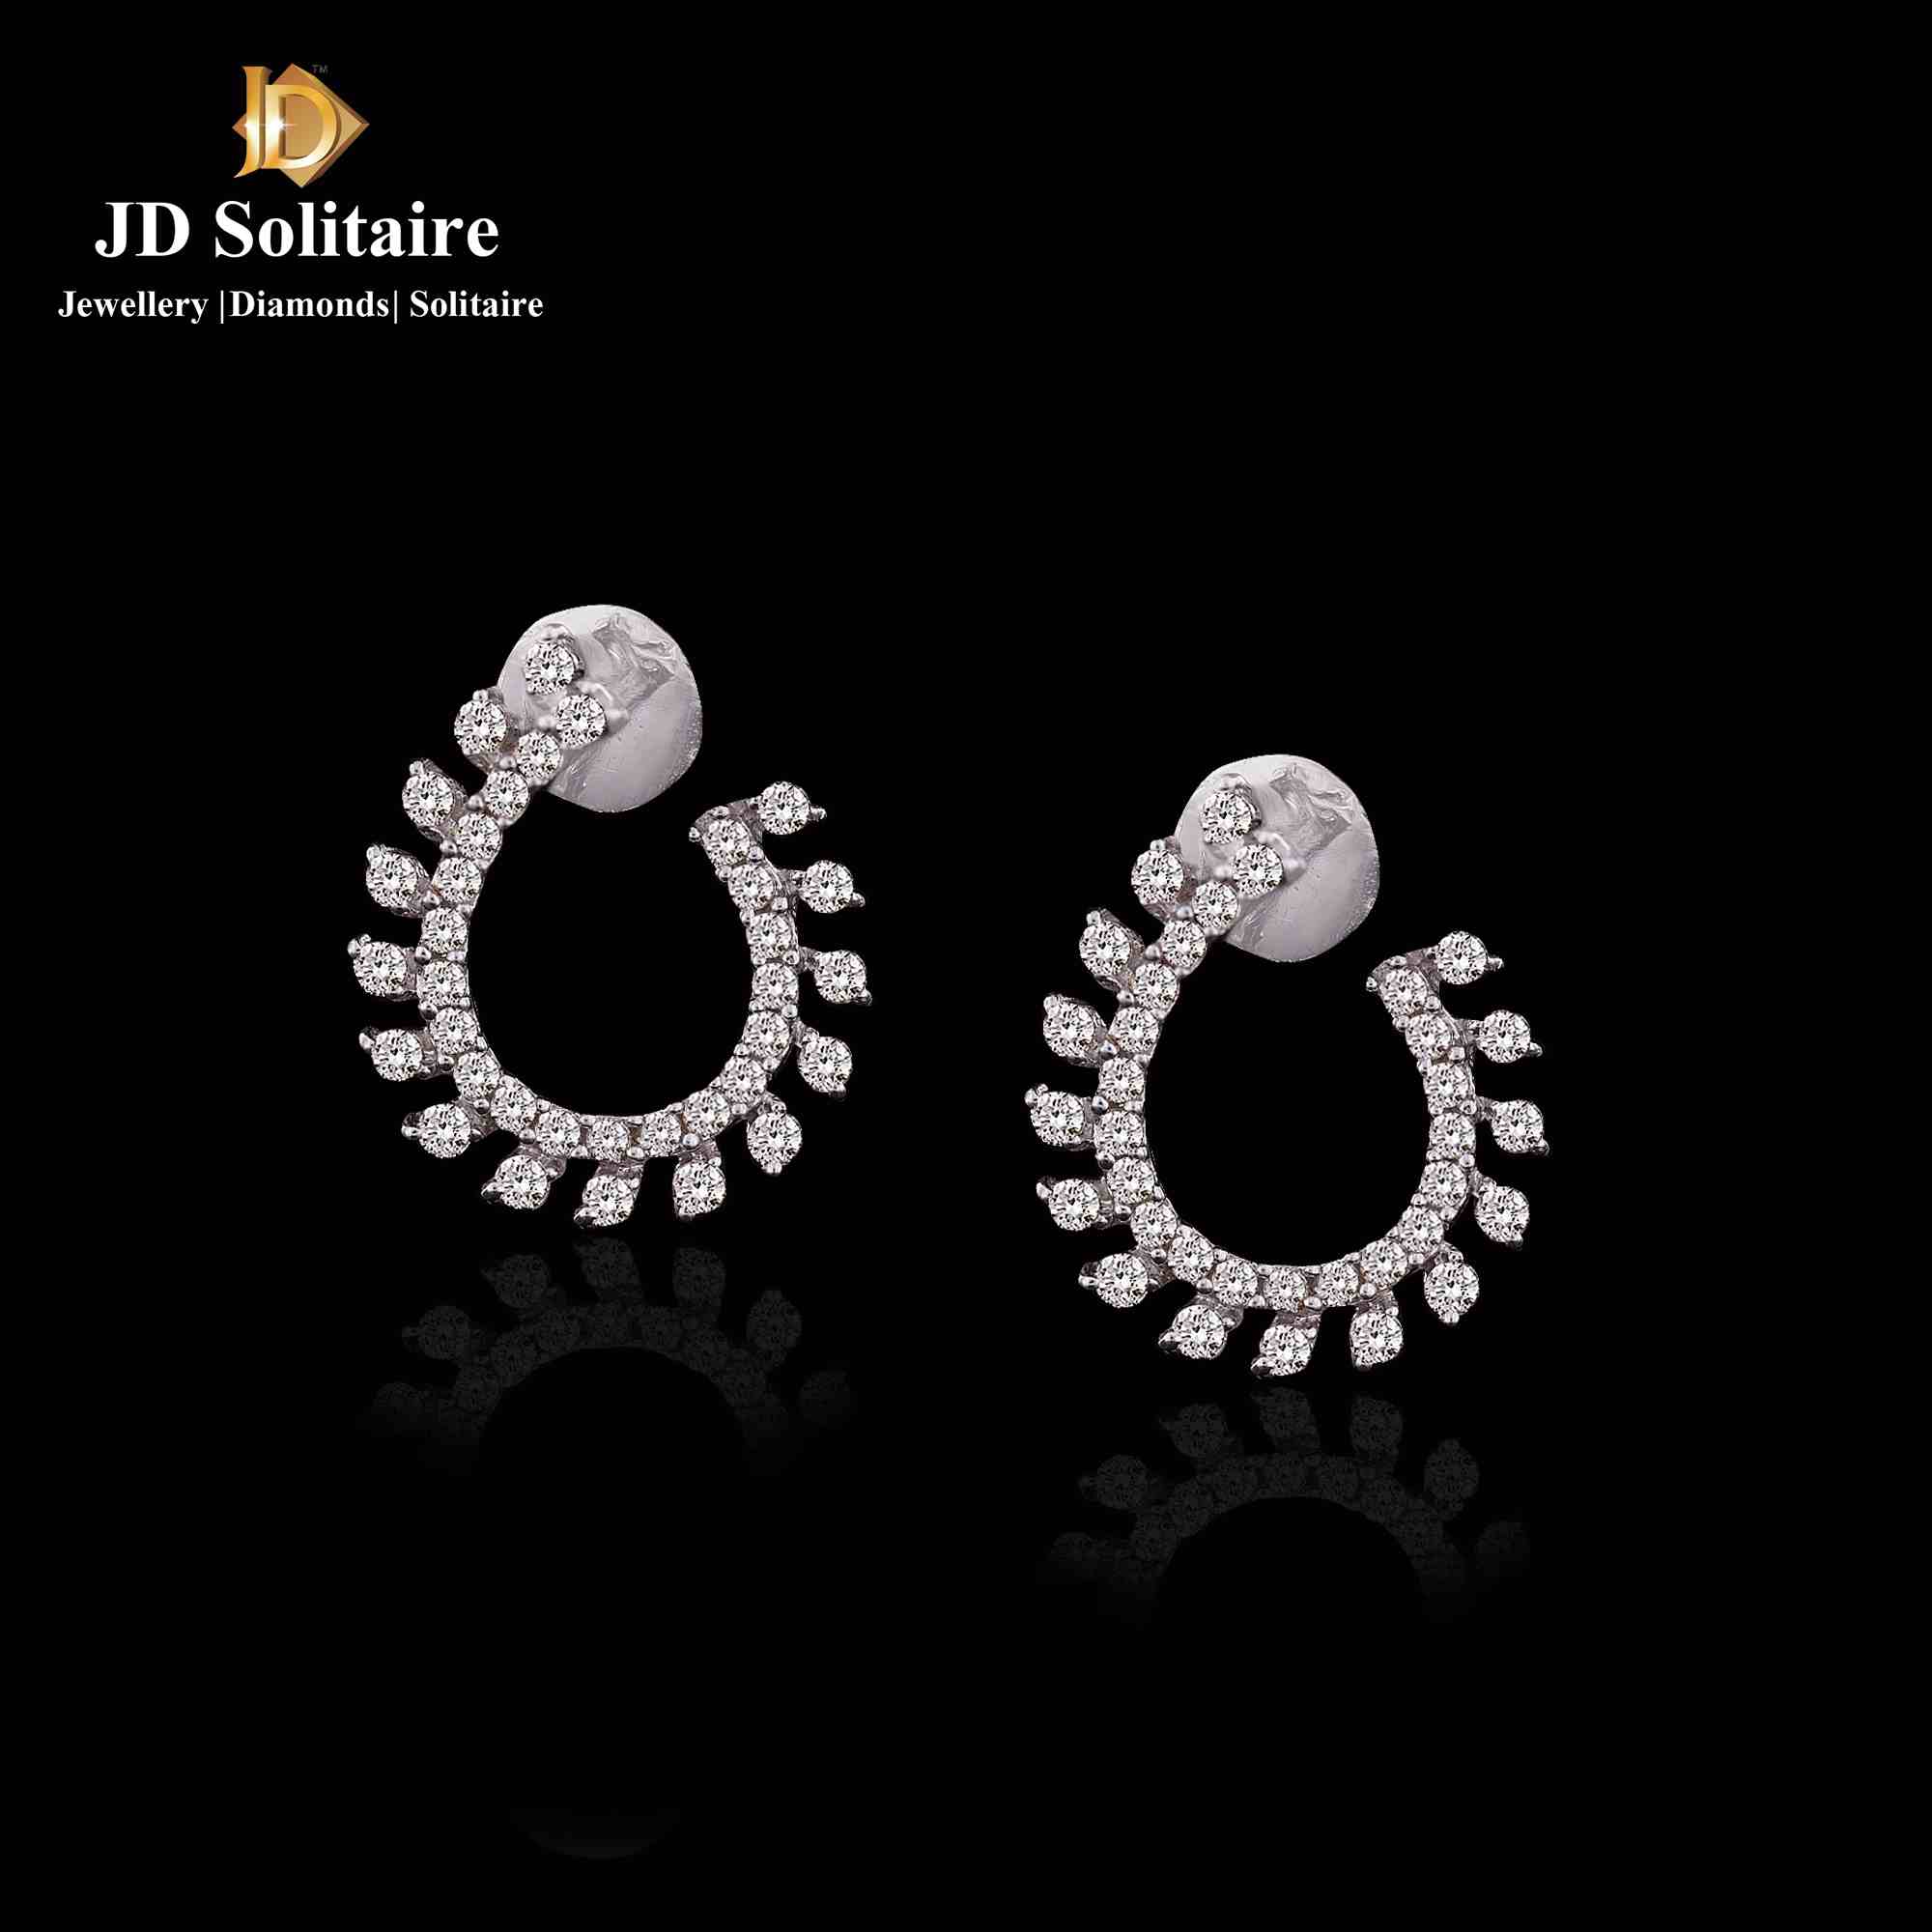 Antique Diamond Earrings - 40,935 For Sale at 1stDibs | diamond earrings on  sale, antique diamond earrings for sale, diamond earrings sale